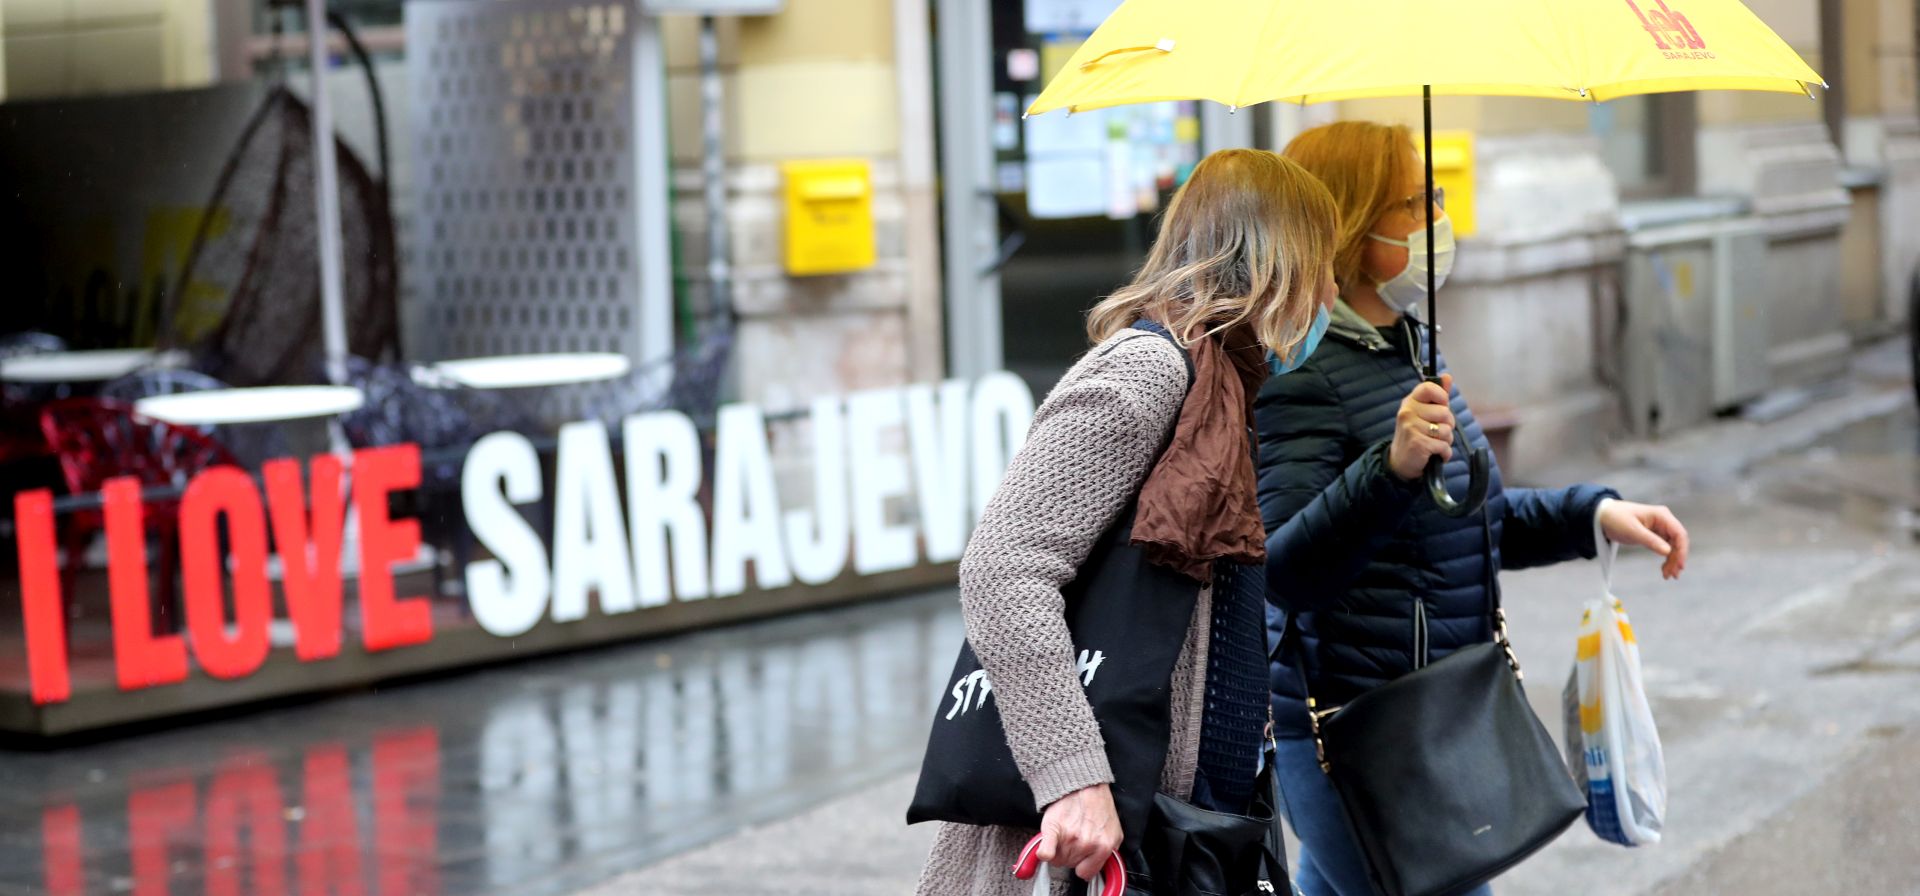 epa08444481 Two women walk past with an umbrella during a rainy day in Sarajevo, Bosnia and Herzegovina, 26 May 2020. Countries around the world are taking increased measures to stem the widespread of the SARS-CoV-2 coronavirus which causes the COVID-19 disease.  EPA/FEHIM DEMIR